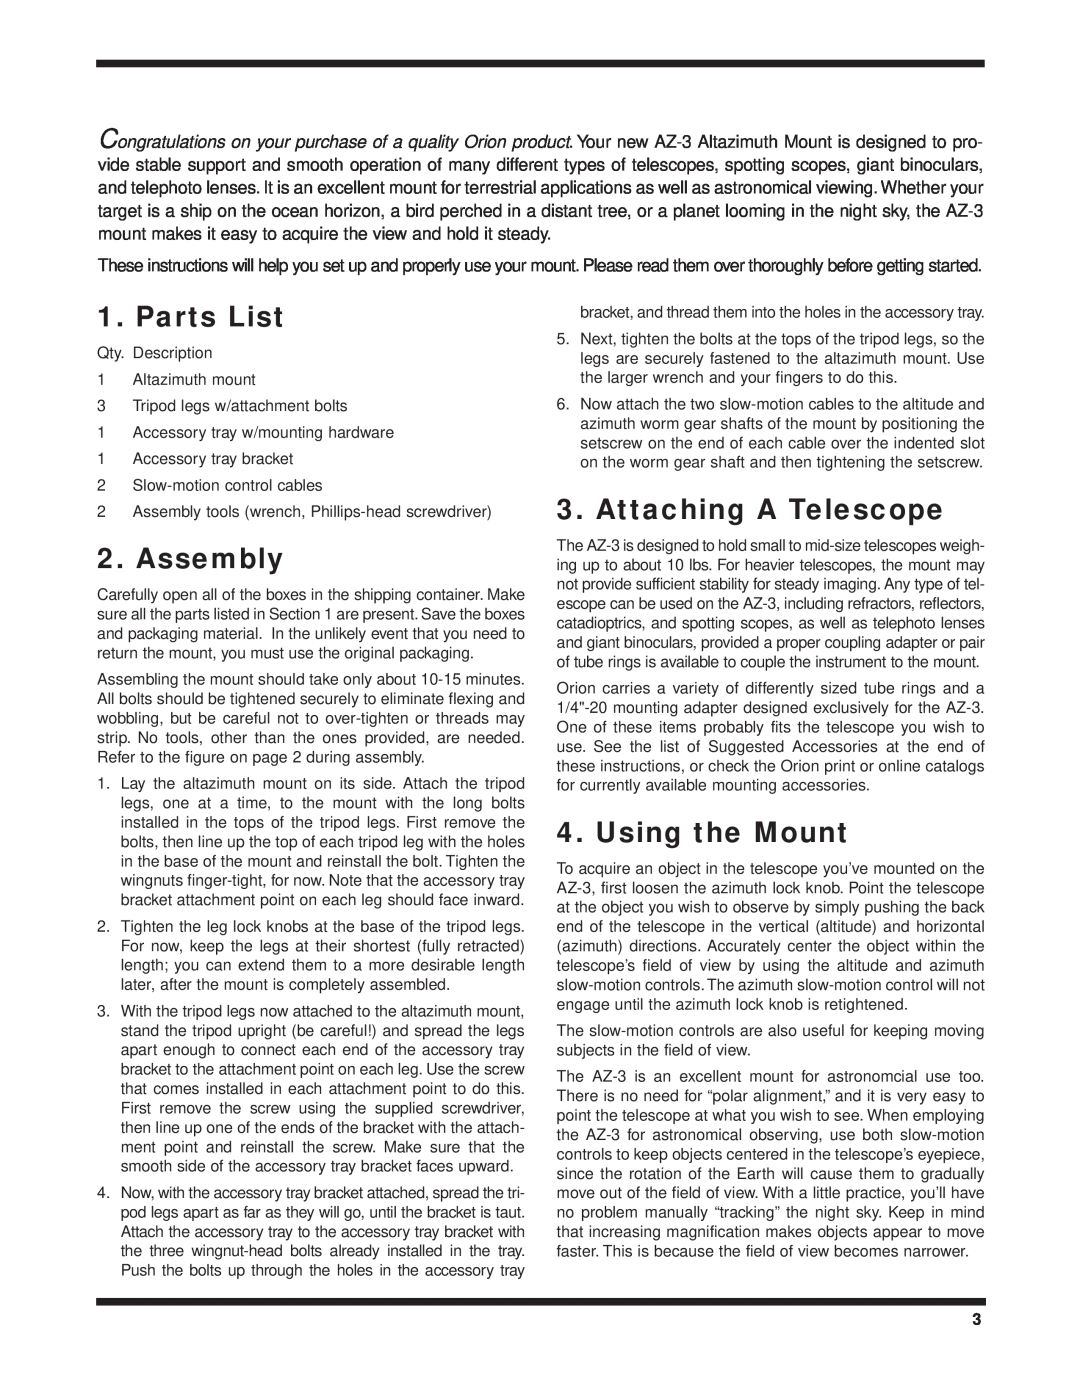 Orion AZ-3 instruction manual Parts List, Assembly, Attaching A Telescope, Using the Mount 